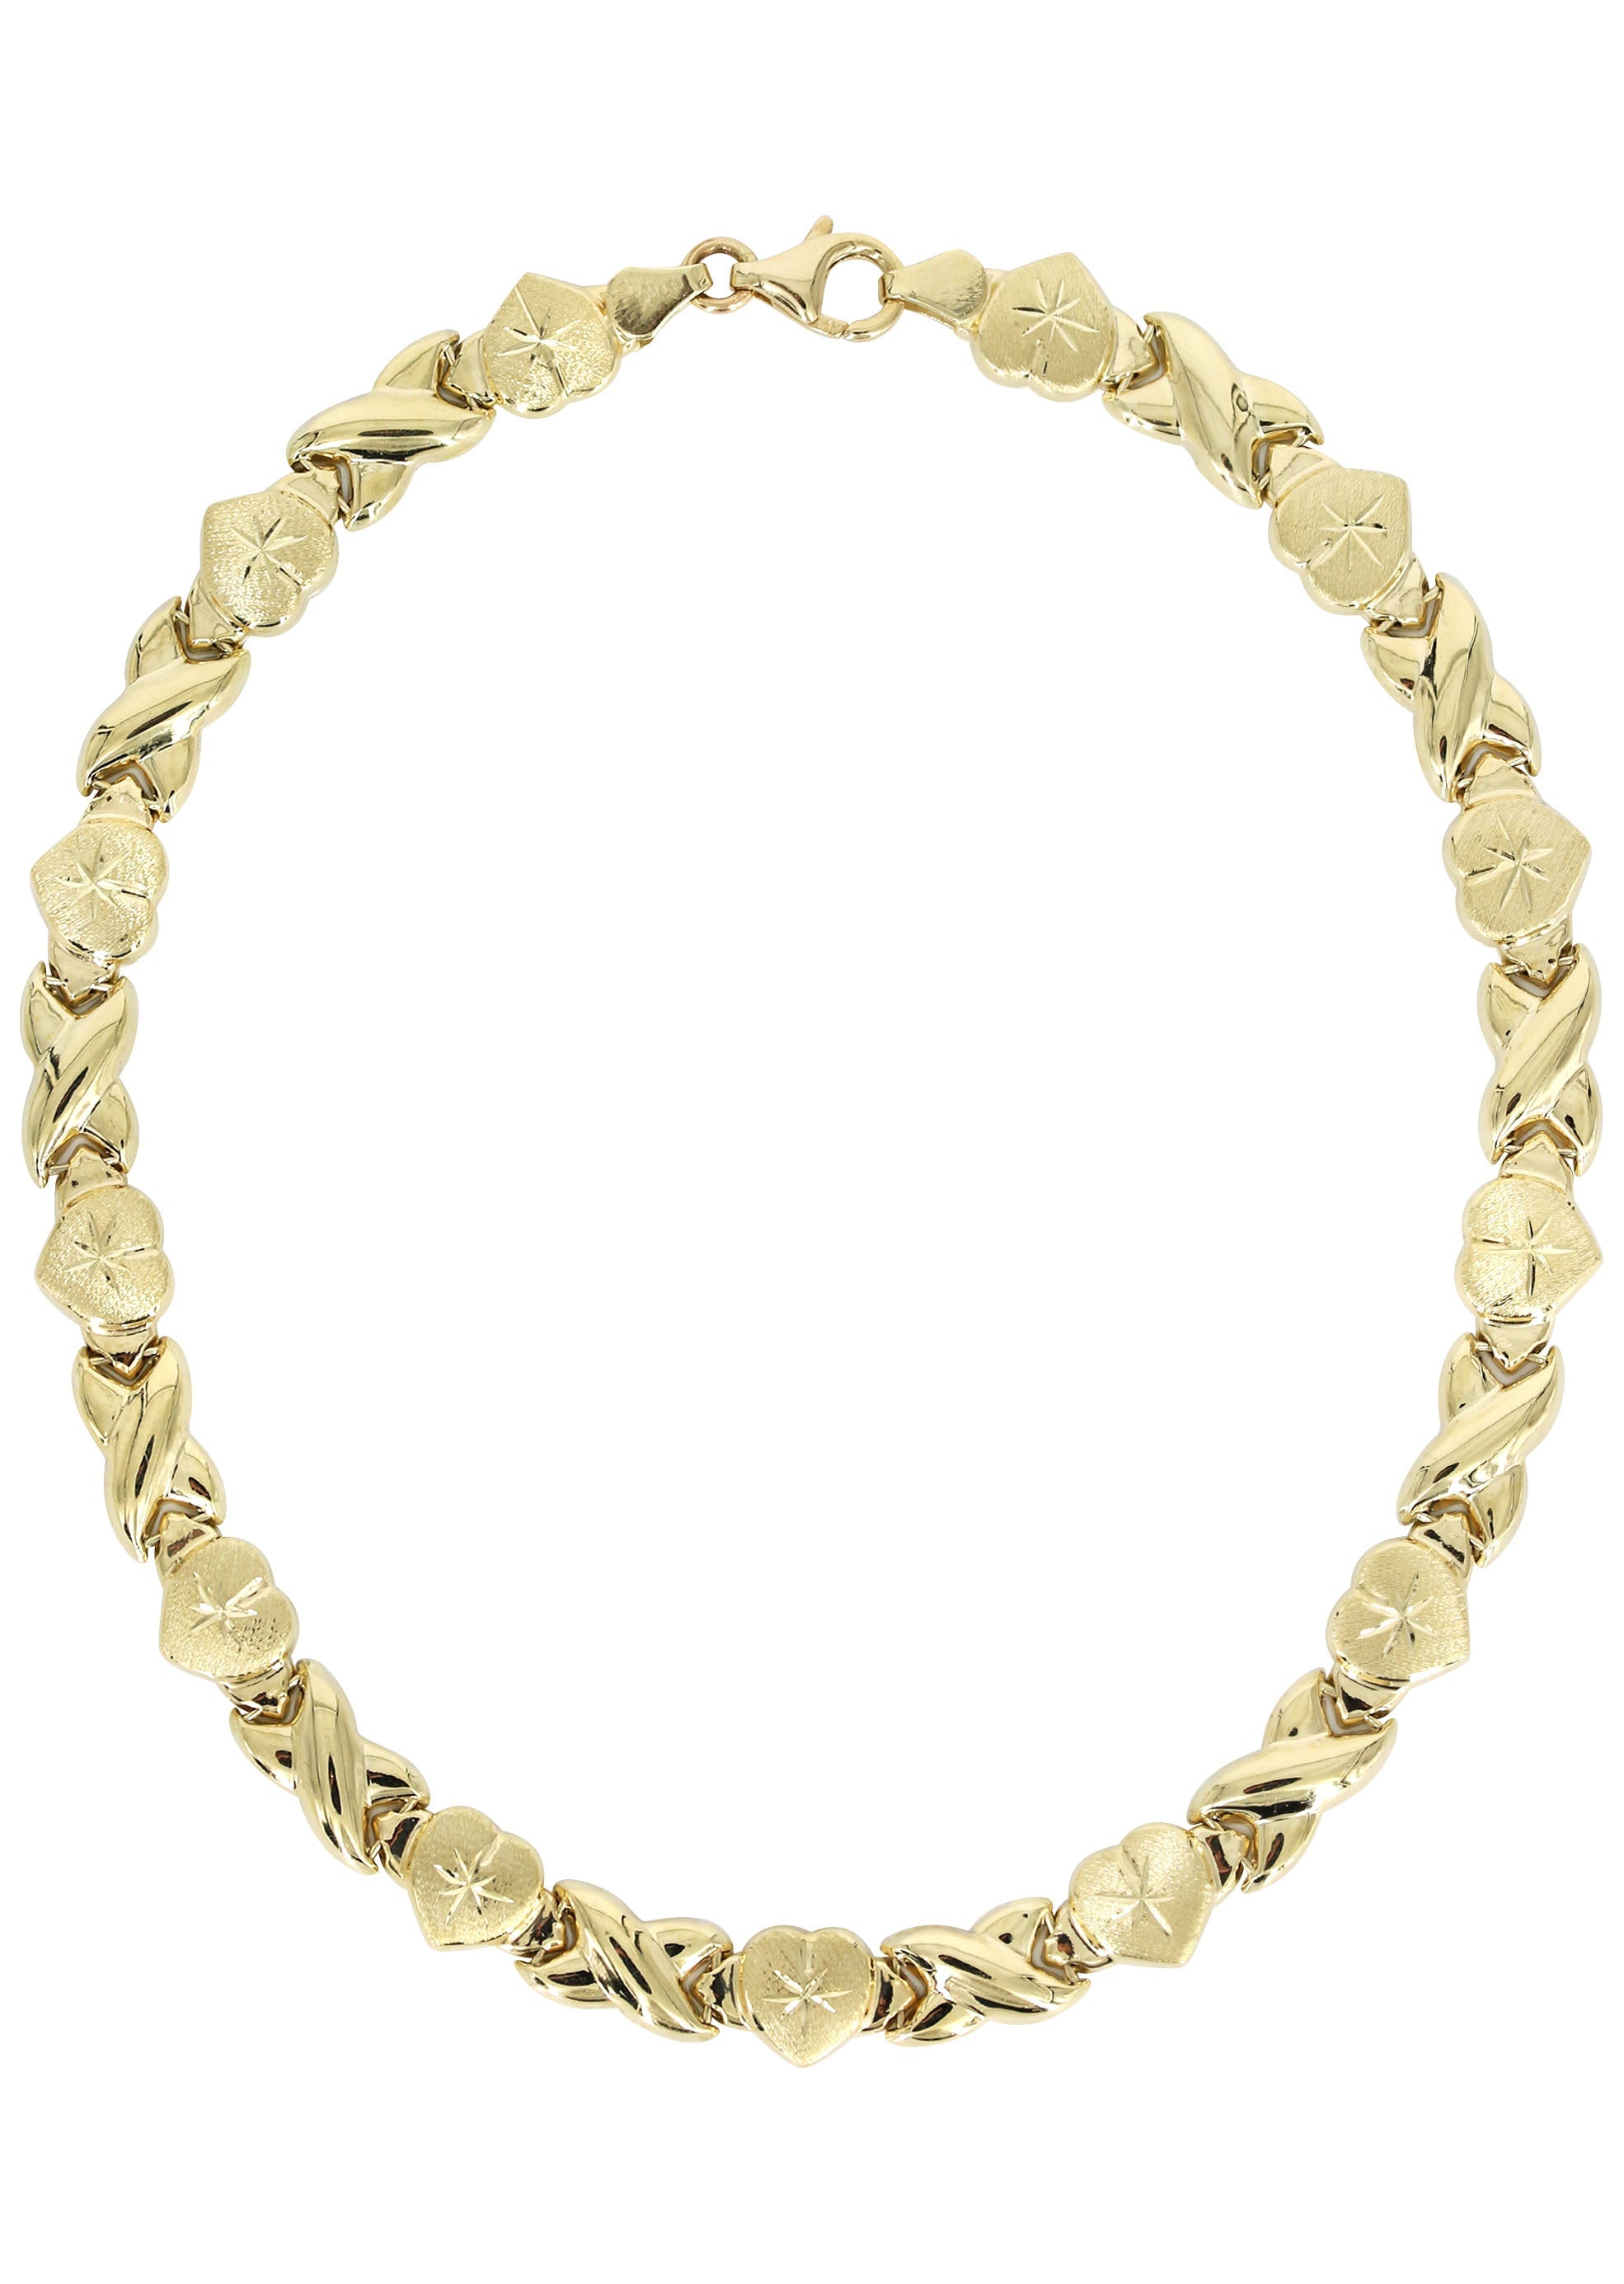 XO Stampato Gold Necklace